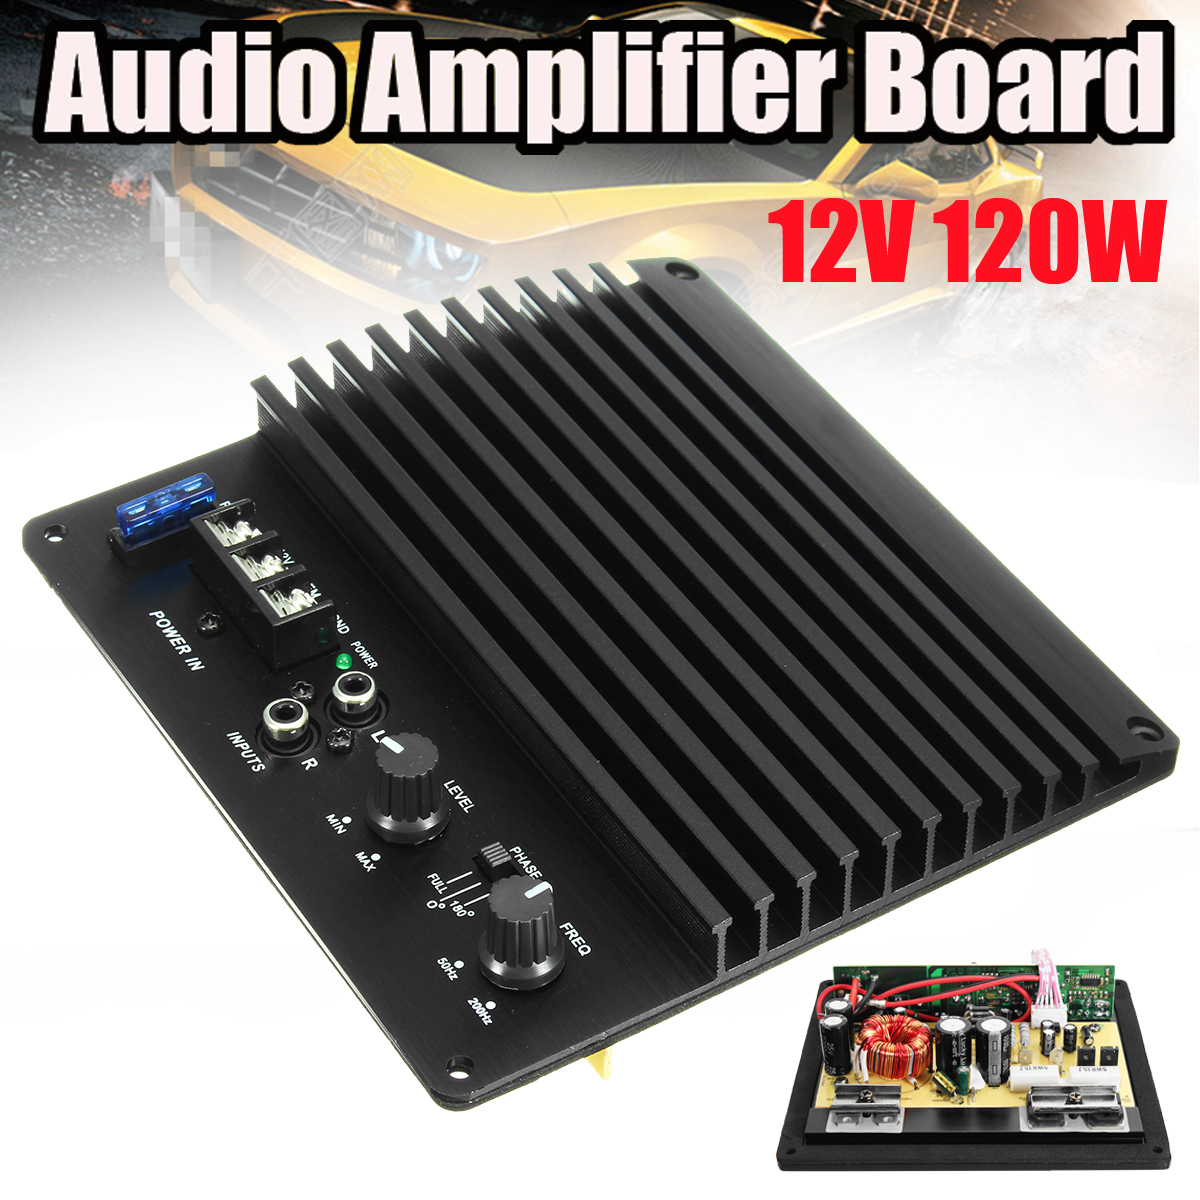 Power-Amplifier-Board-Powerful-Bass-Subwoofer-Amp-Amplify-Module-12V-1200W-for-Car-Audio-Stereo-1293095